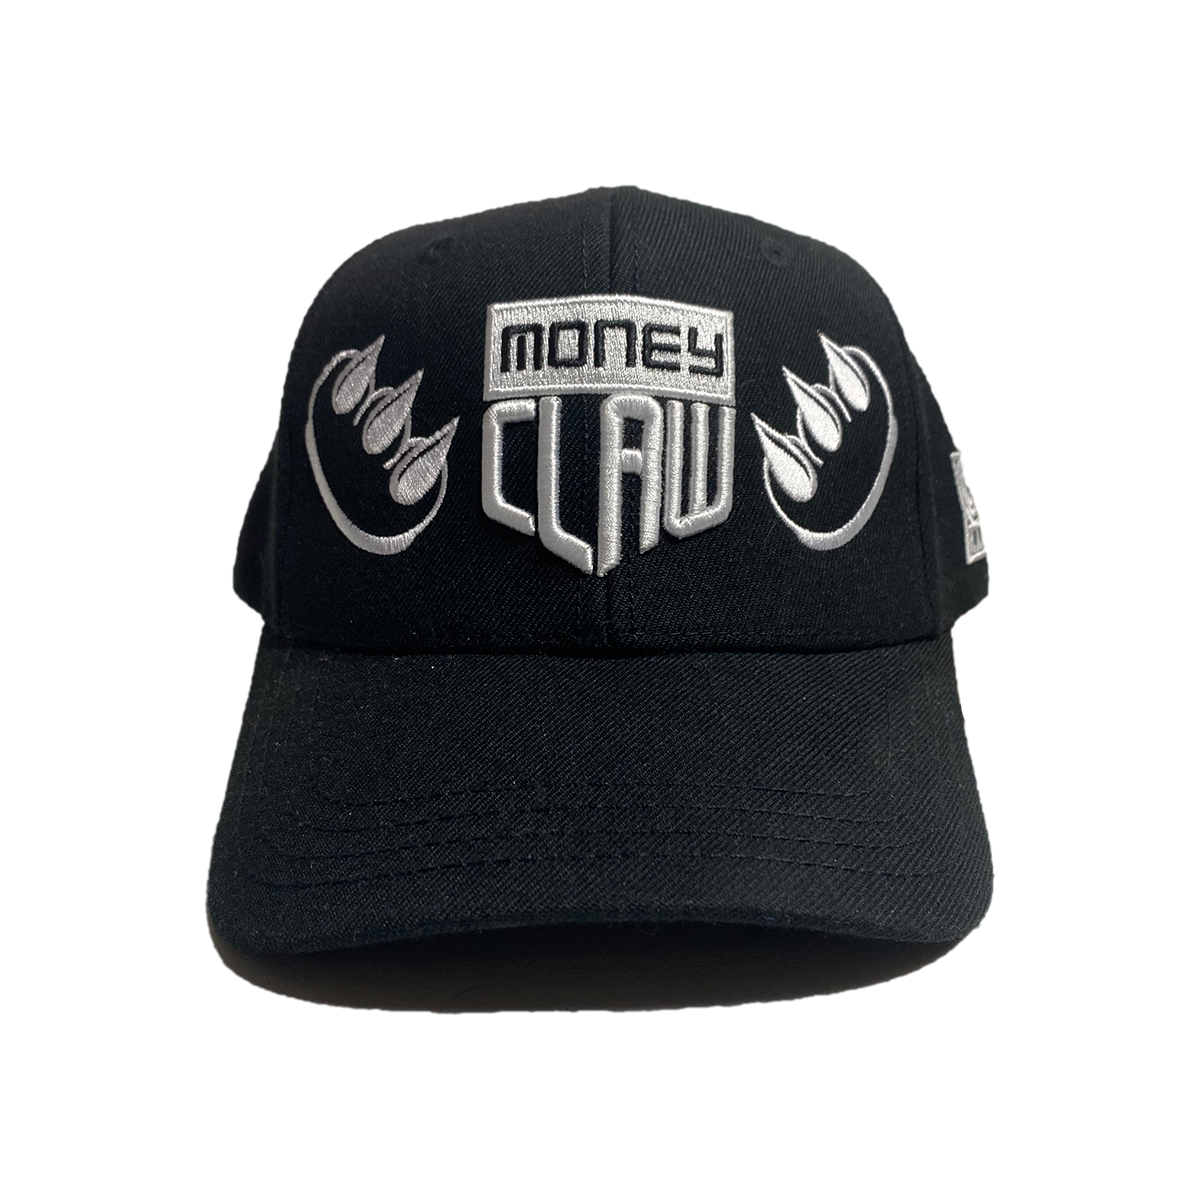 BLACK EMBROIDERED CLAW MONEY HAT